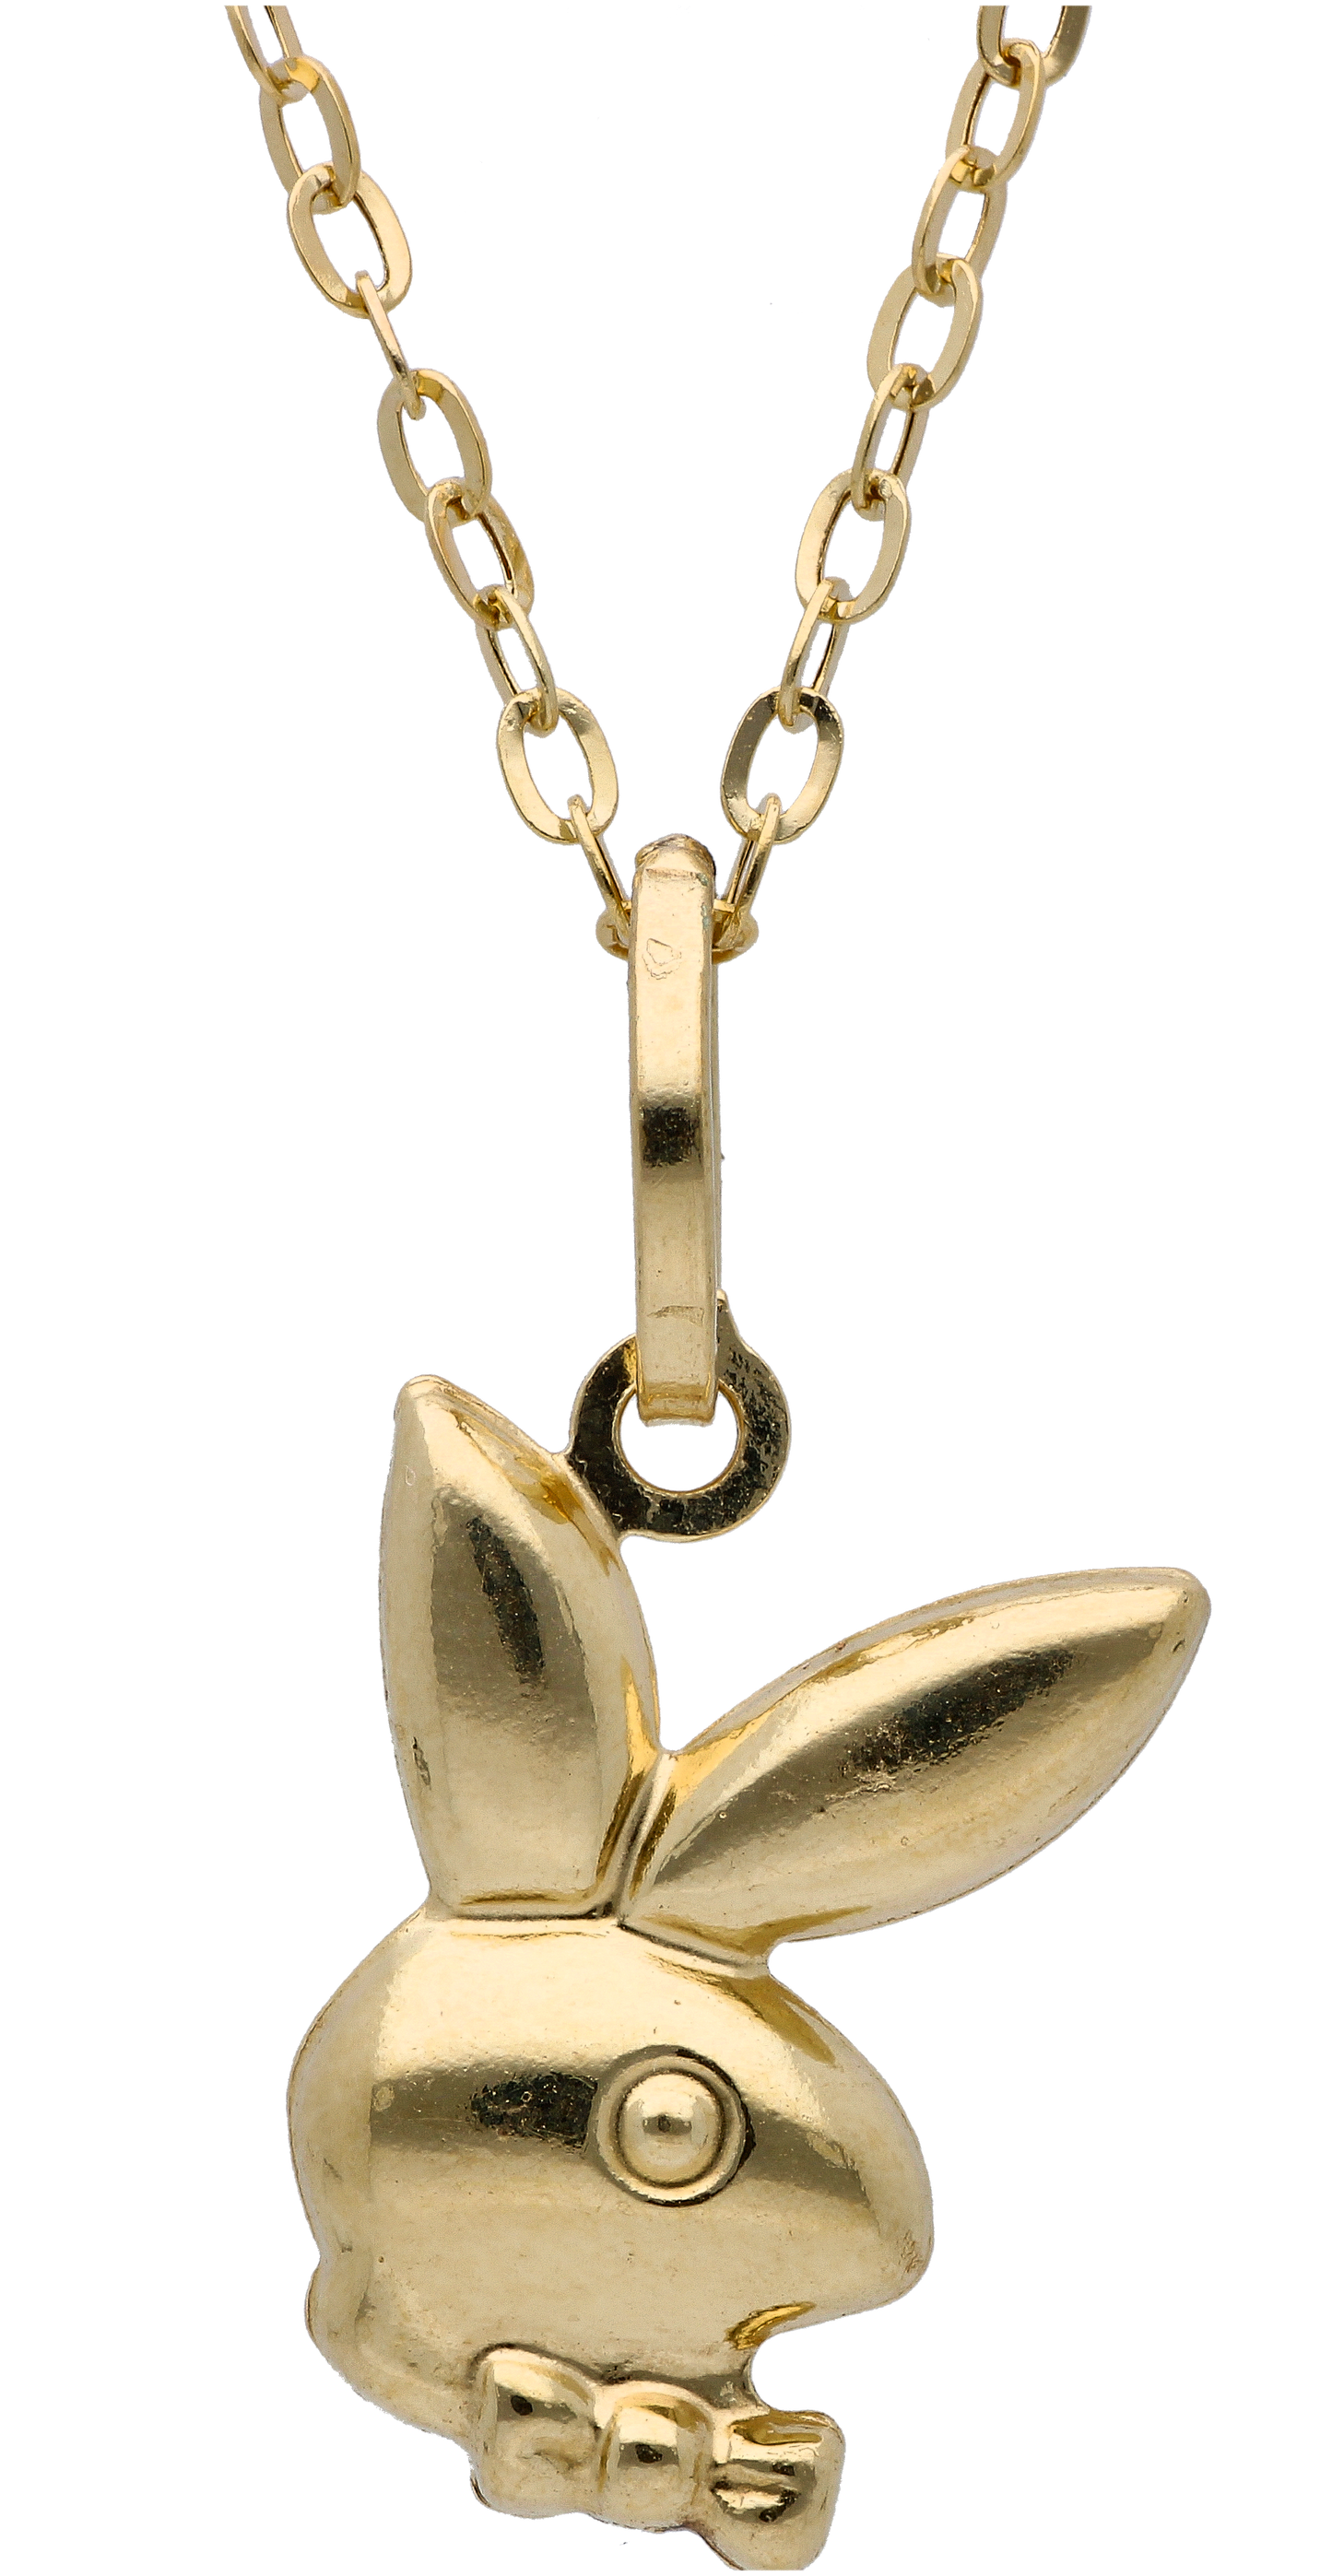 Gold Necklace (Chain with Playboy Pendant) 18KT - FKJNKL18KU6301